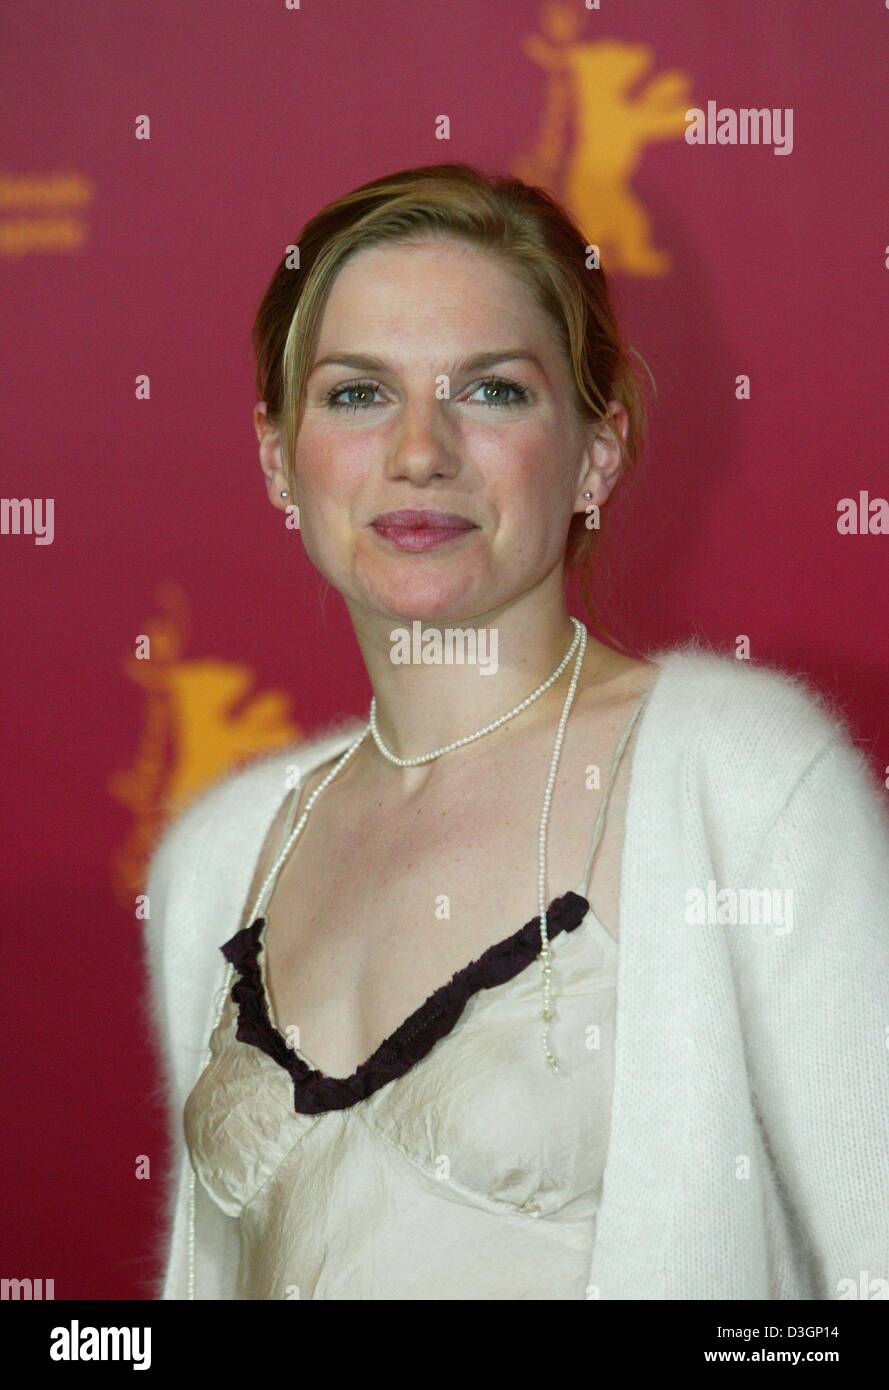 (dpa) - British actress Eva Birthistle smiles as she poses at a  press conference during the 54th Berlinale International Film Festival in Berlin, 13 February 2004. Birthistle presented her new film 'AFond Kiss' by British director Ken Loach. The film tells the love story between a young Catholic woman from Glasgow and the son of Muslim immigrants from Pakistan. Stock Photo